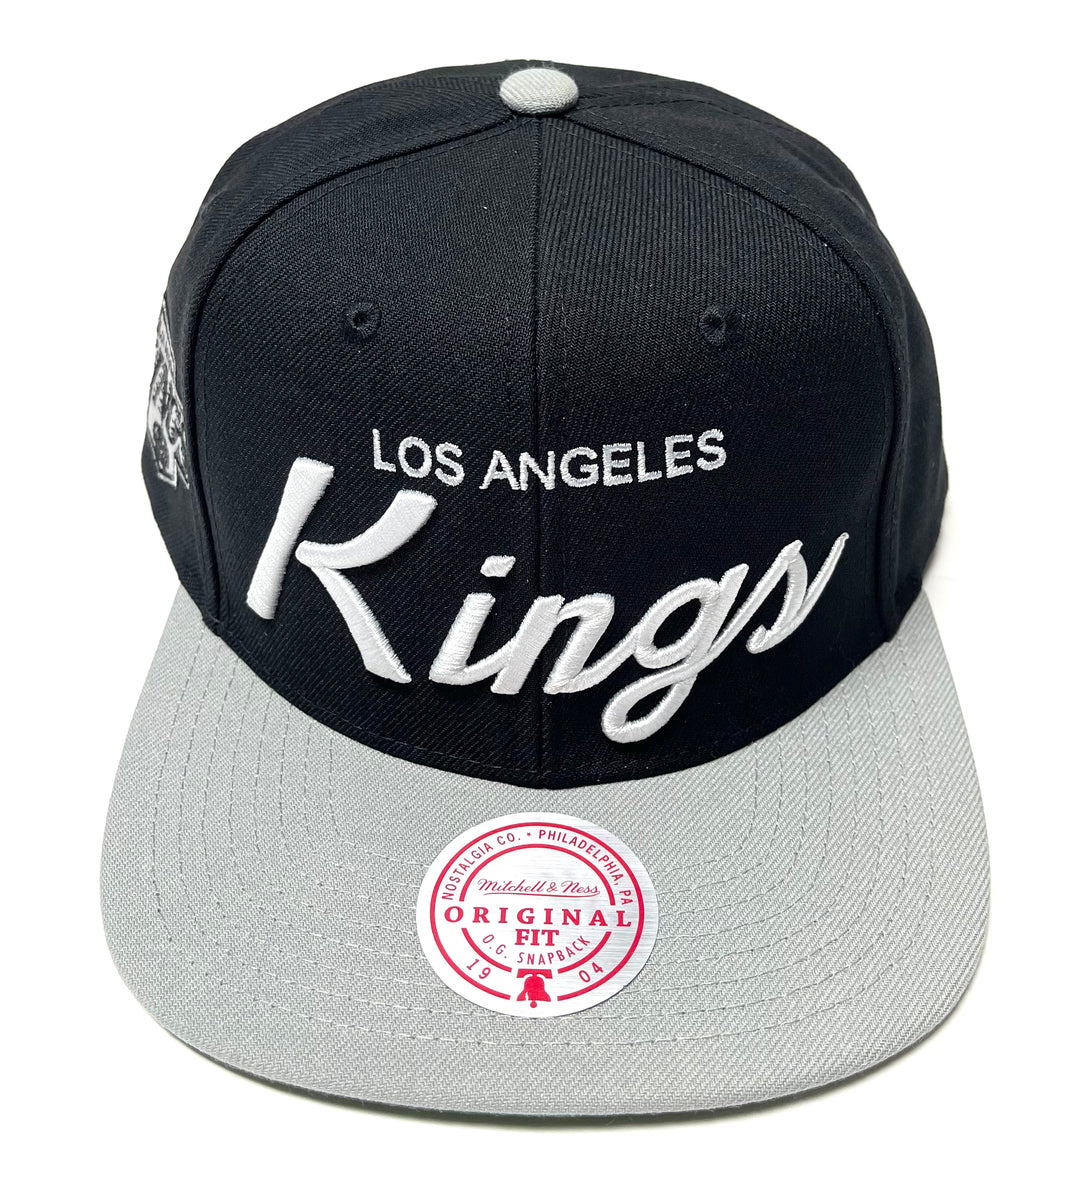 Los Angeles Kings Munch Time Vintage Grey Snapback - Mitchell & Ness cap